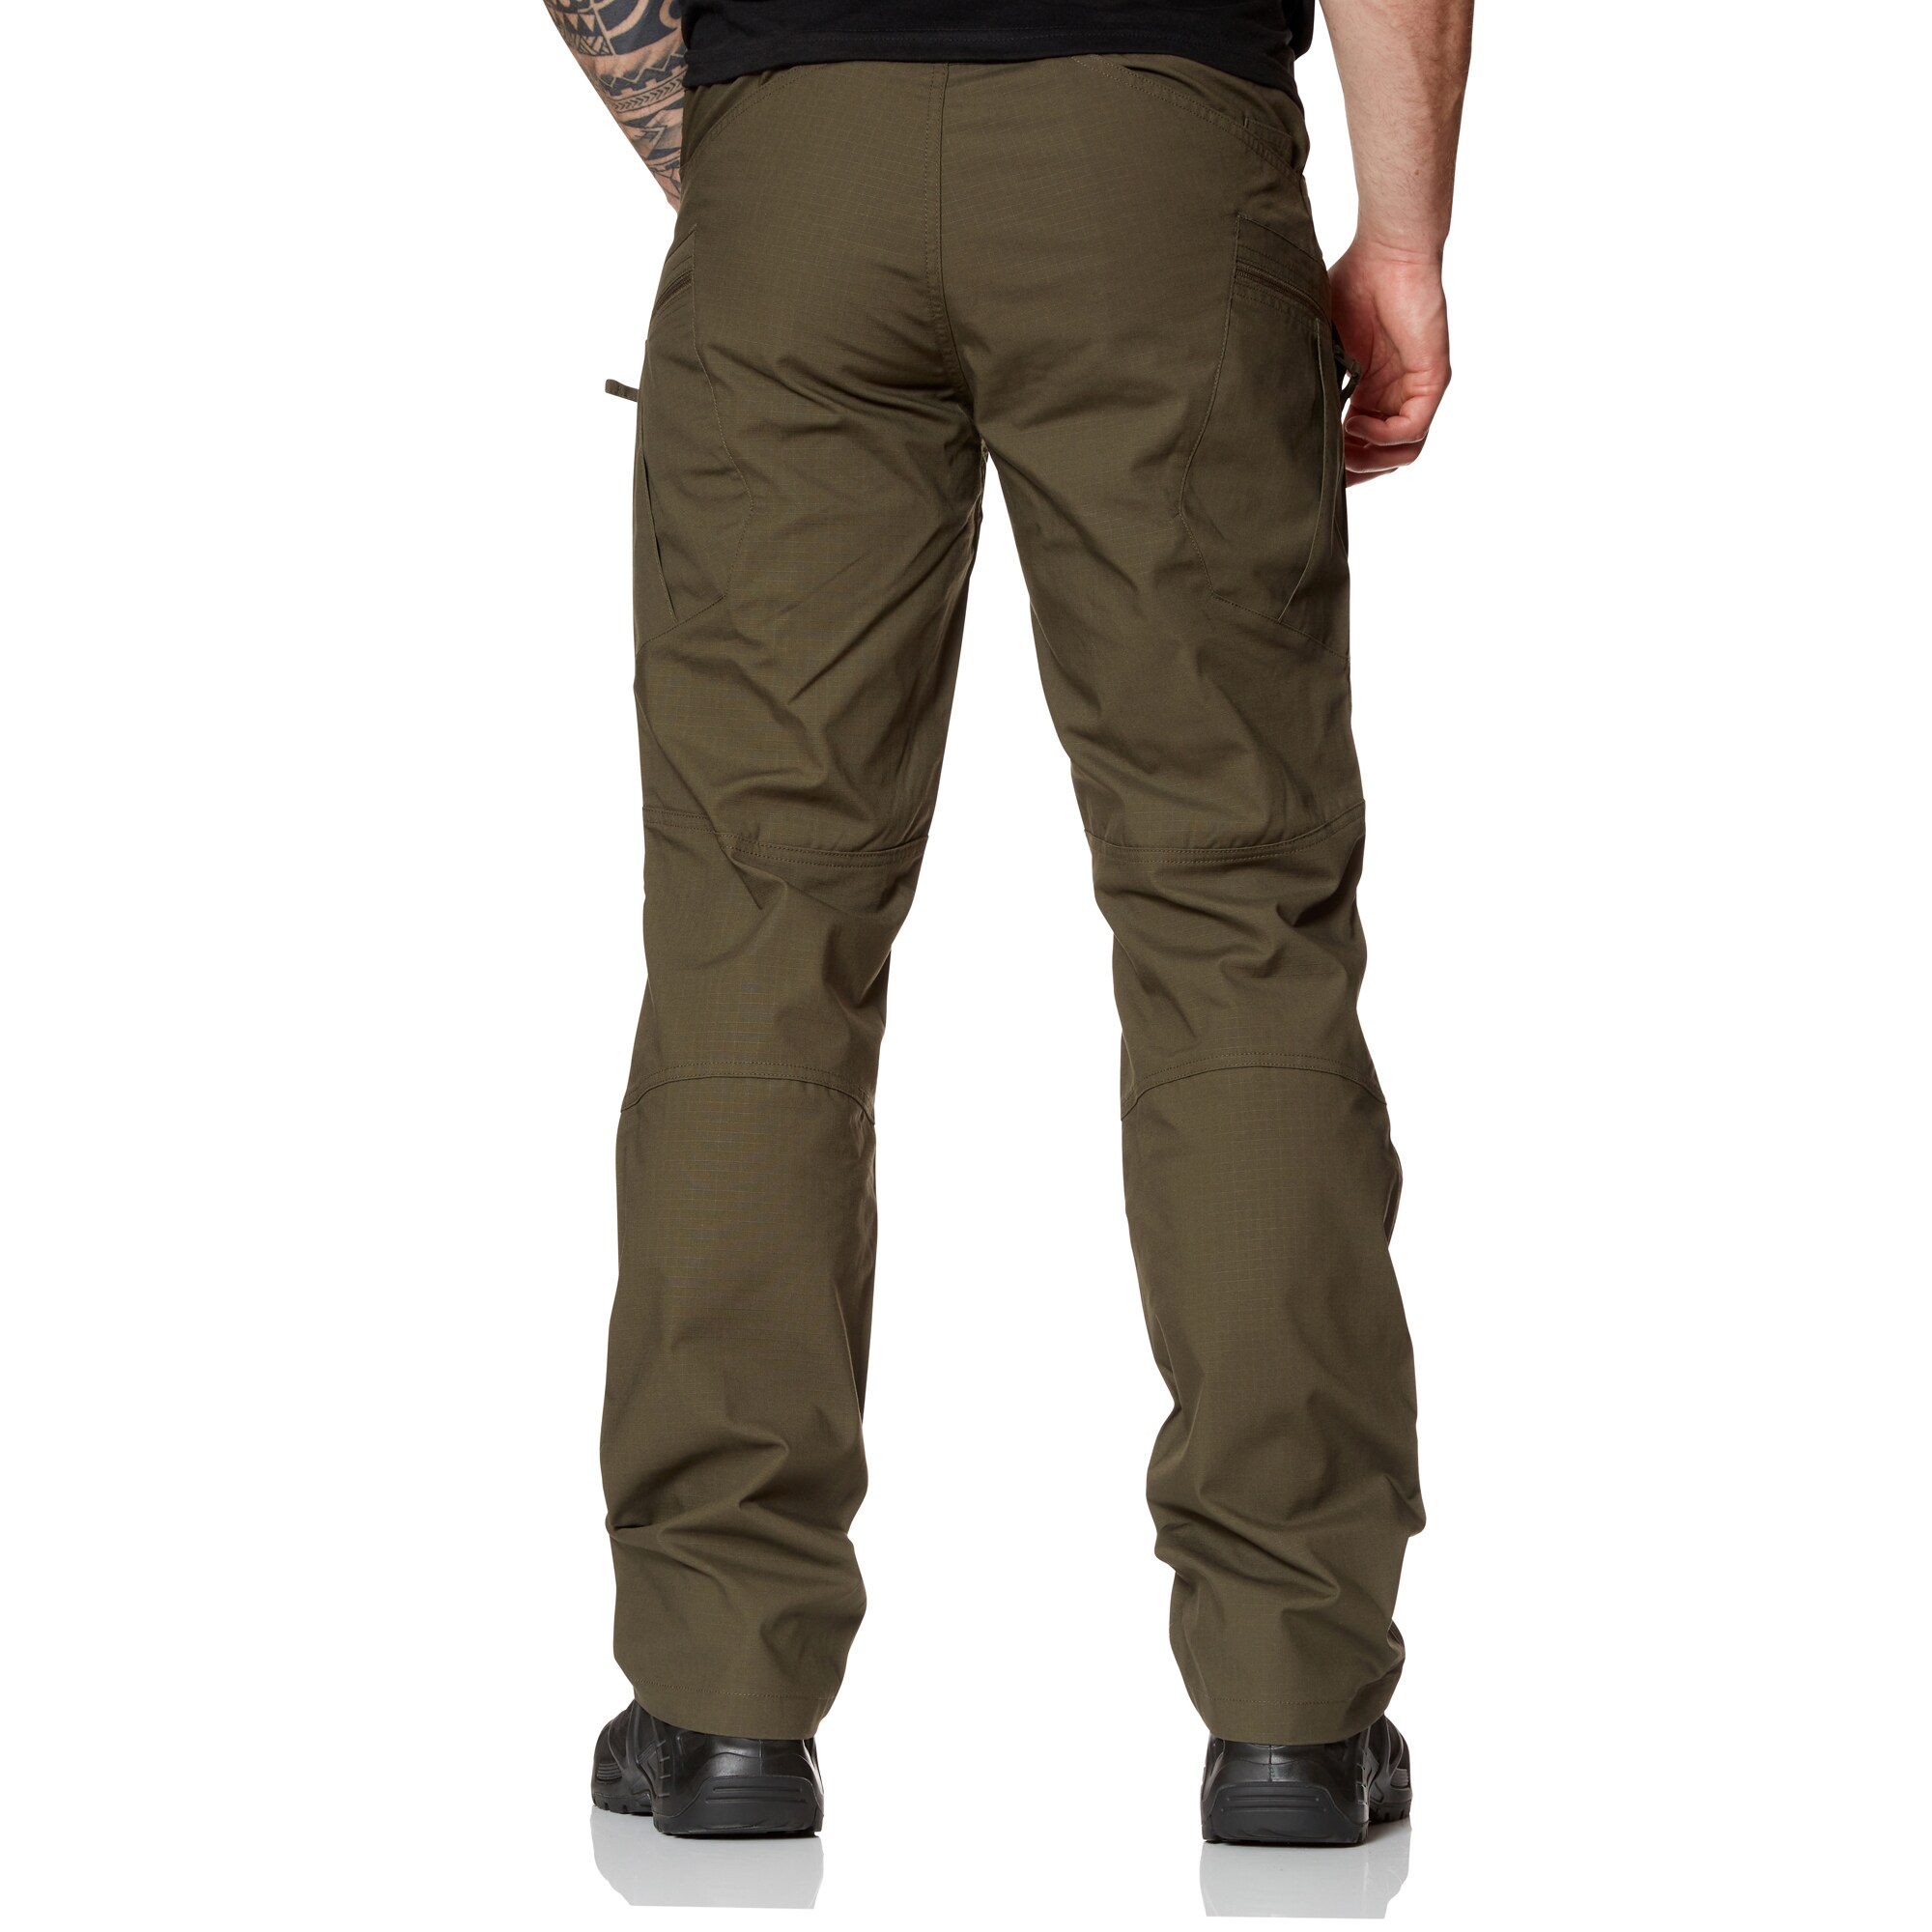 Purchase the Helikon-Tex Pants UTP Ripstop taiga green by ASMC